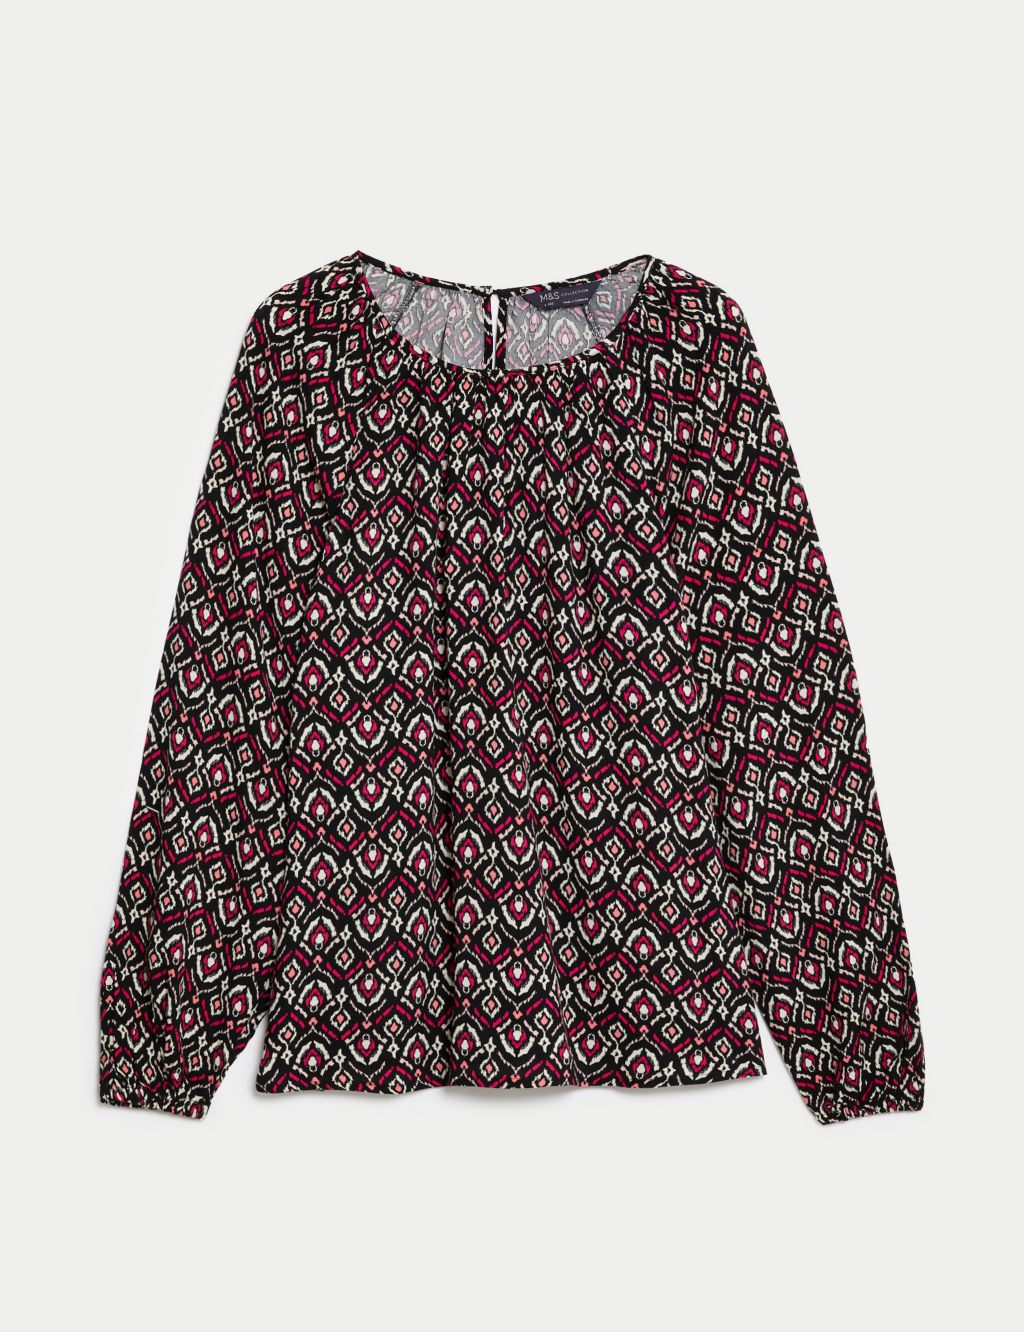 Printed Crew Neck Blouse | M&S Collection | M&S